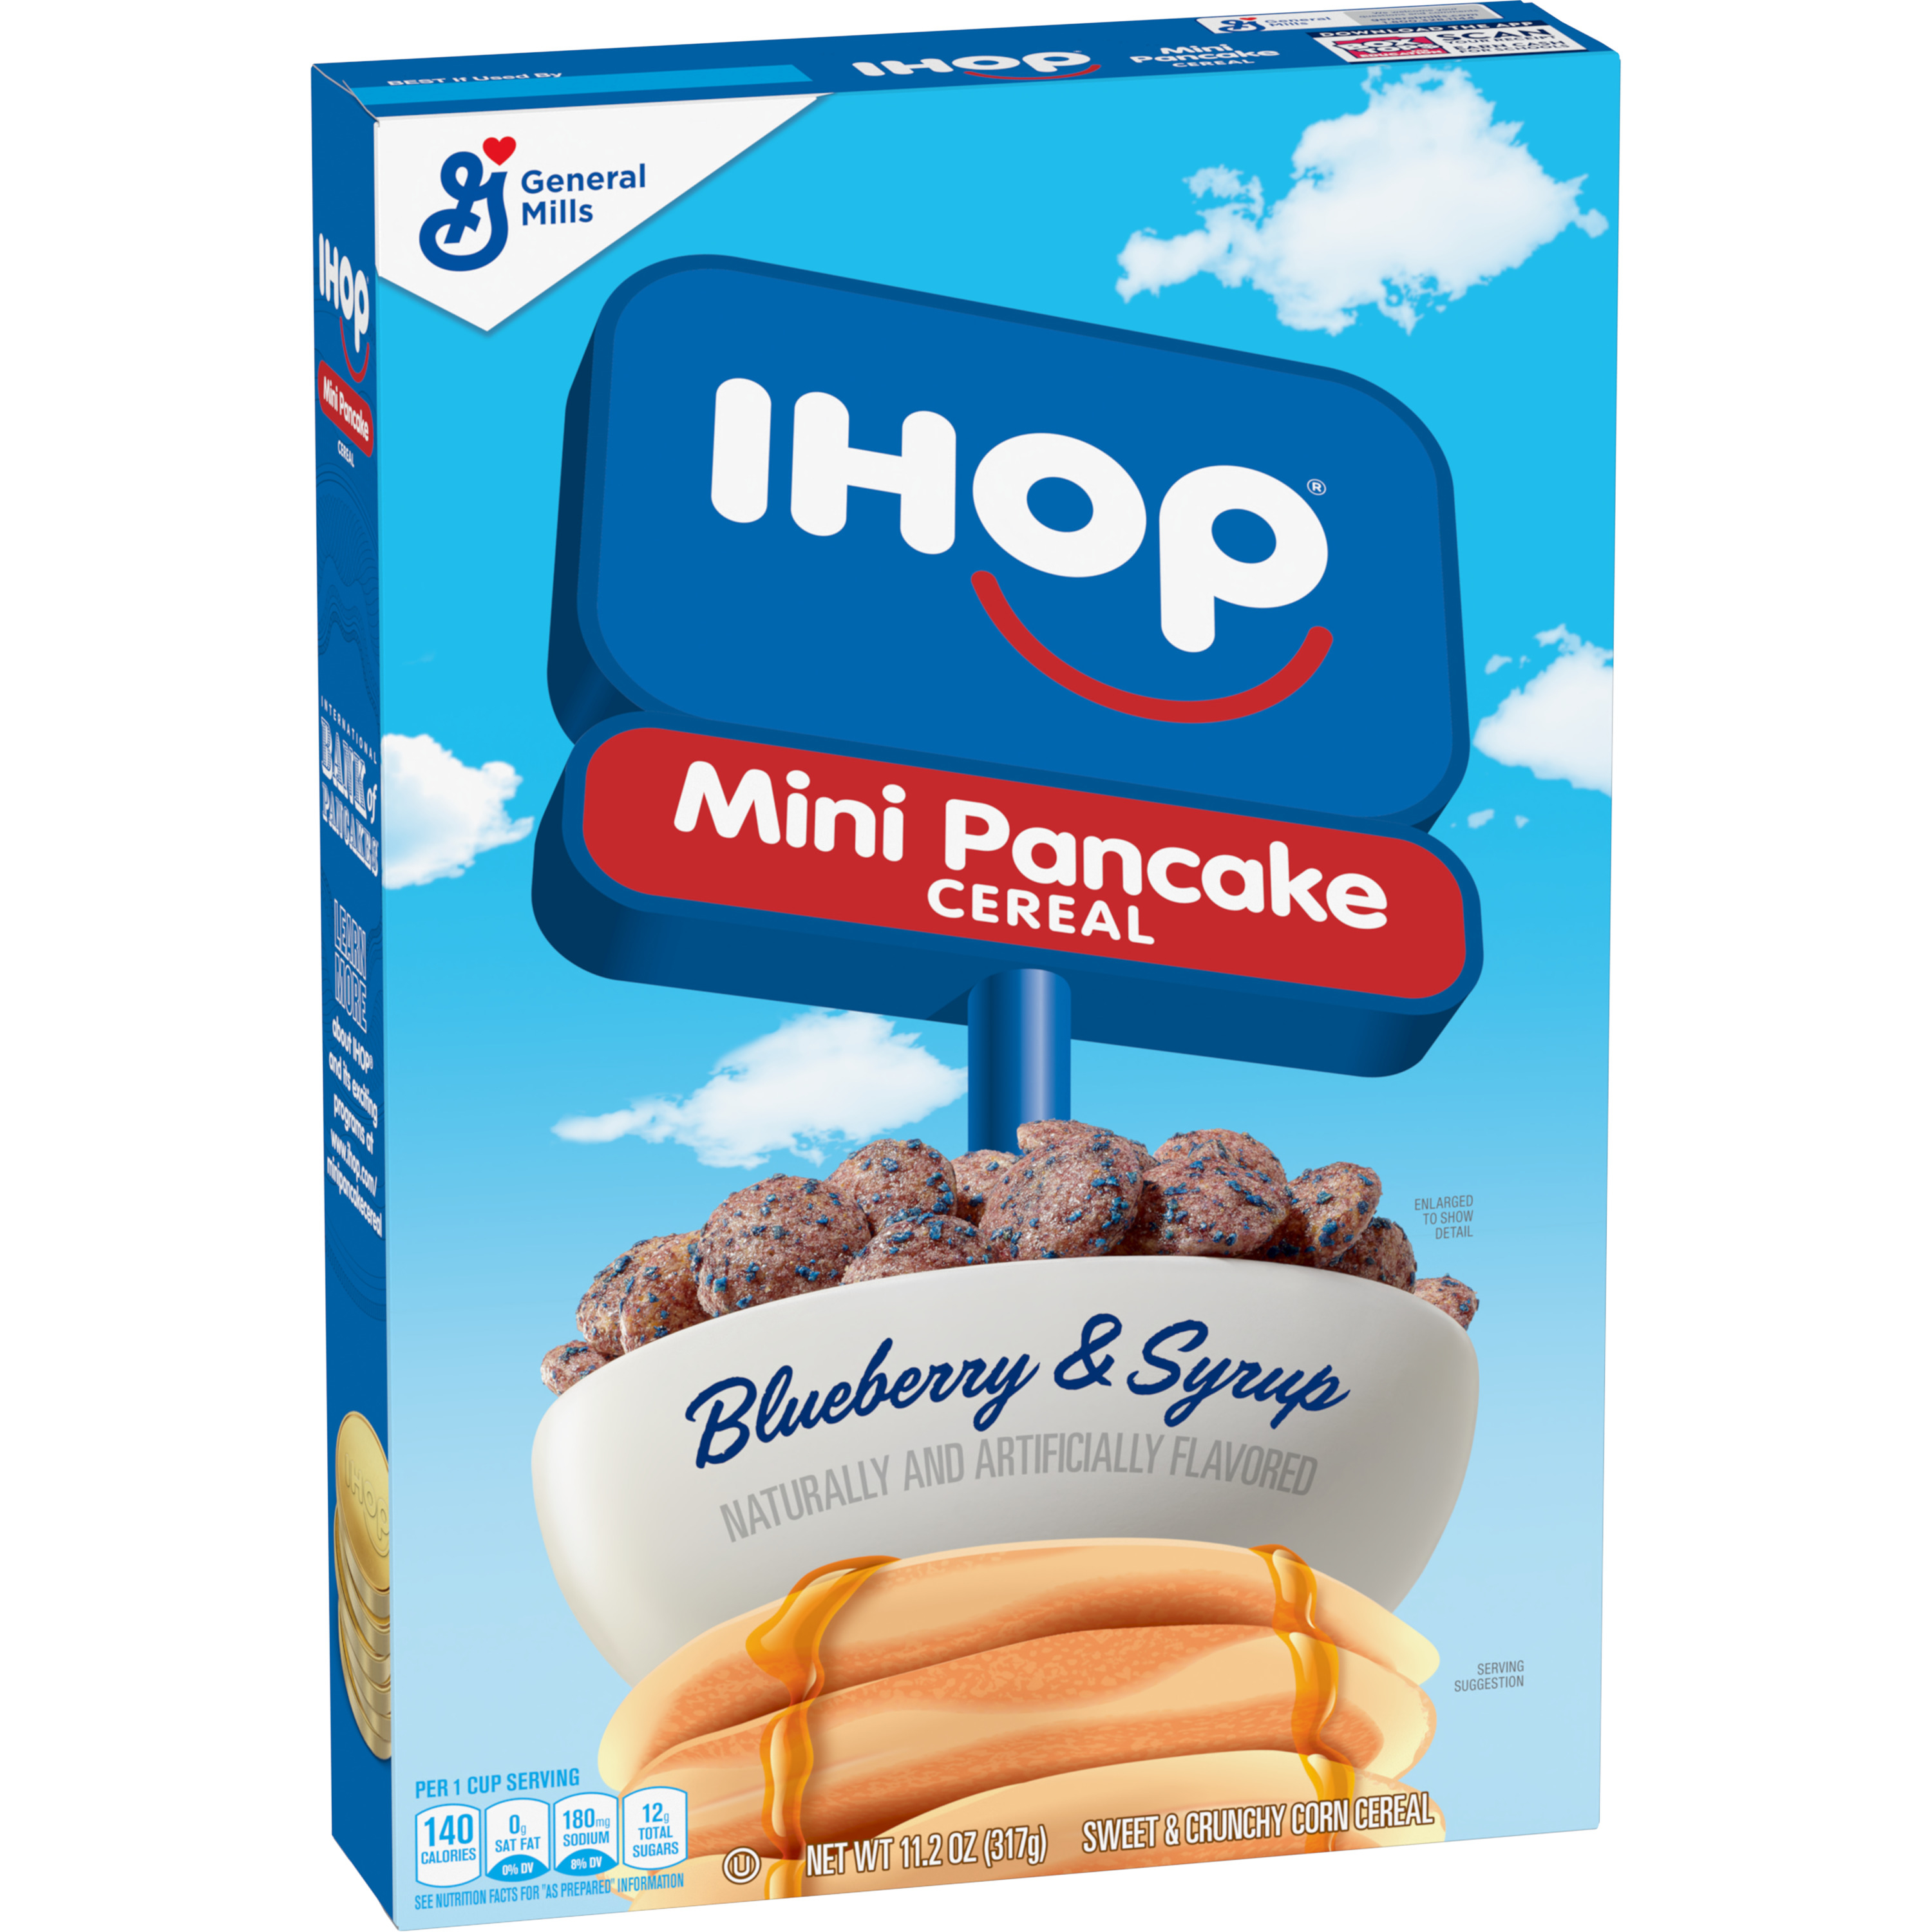 IHOP Mini Pancake Cereal Blueberry & Syrup